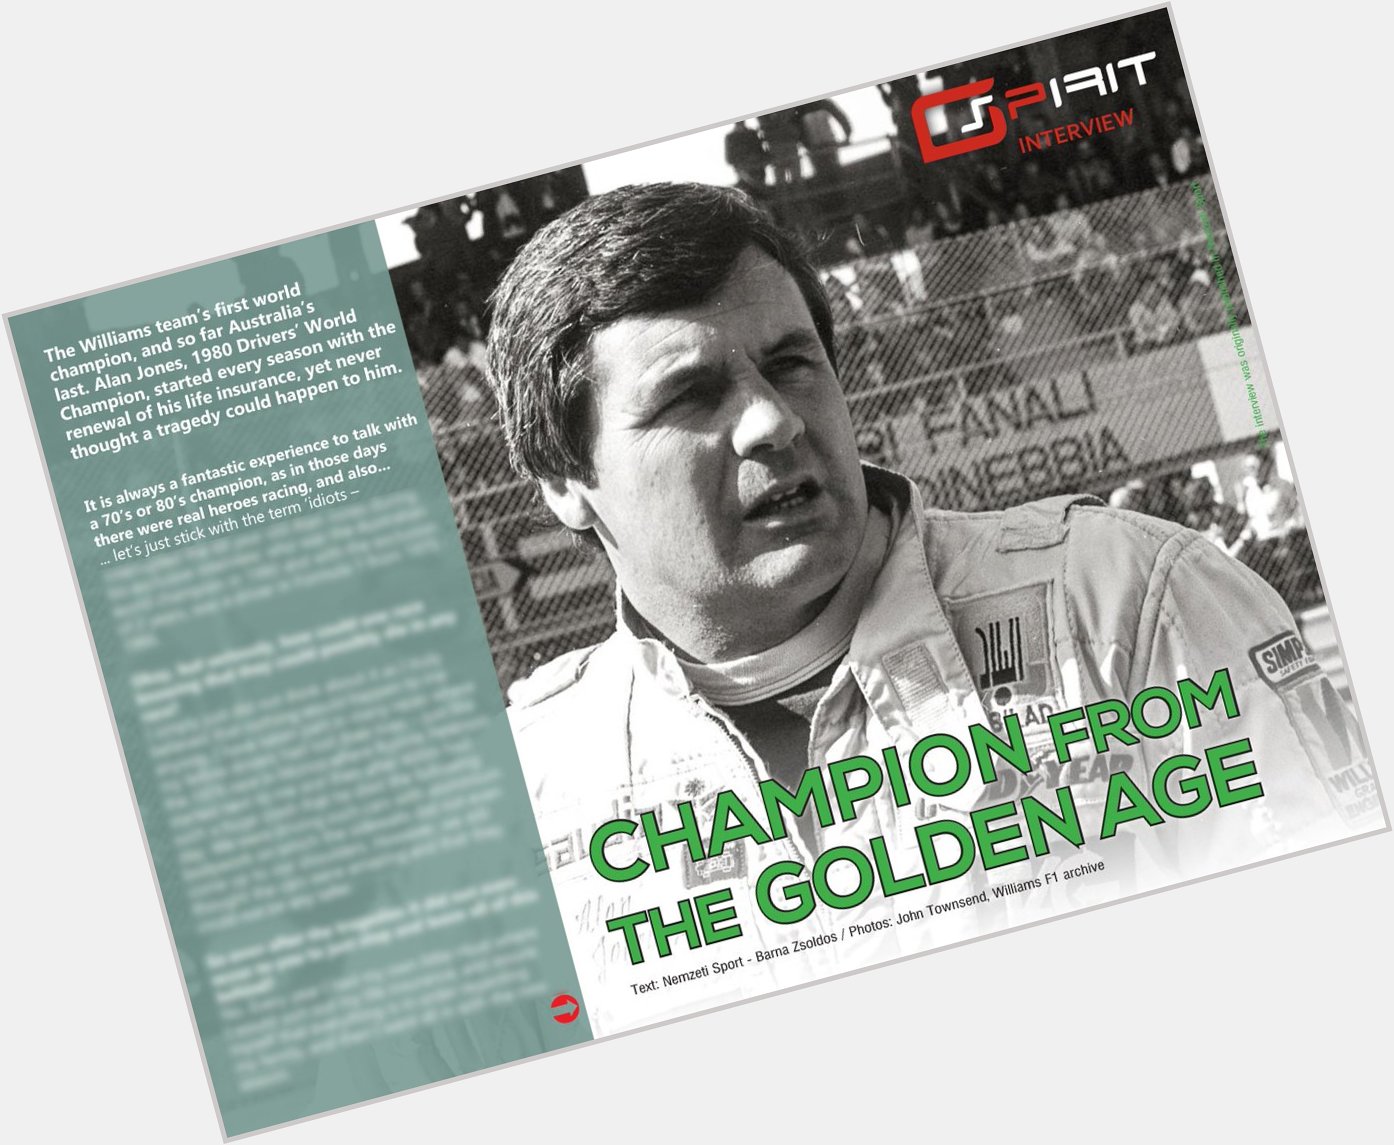 We wish a happy (belated) birthday to Alan Jones World Champ in 1980 with this interview  